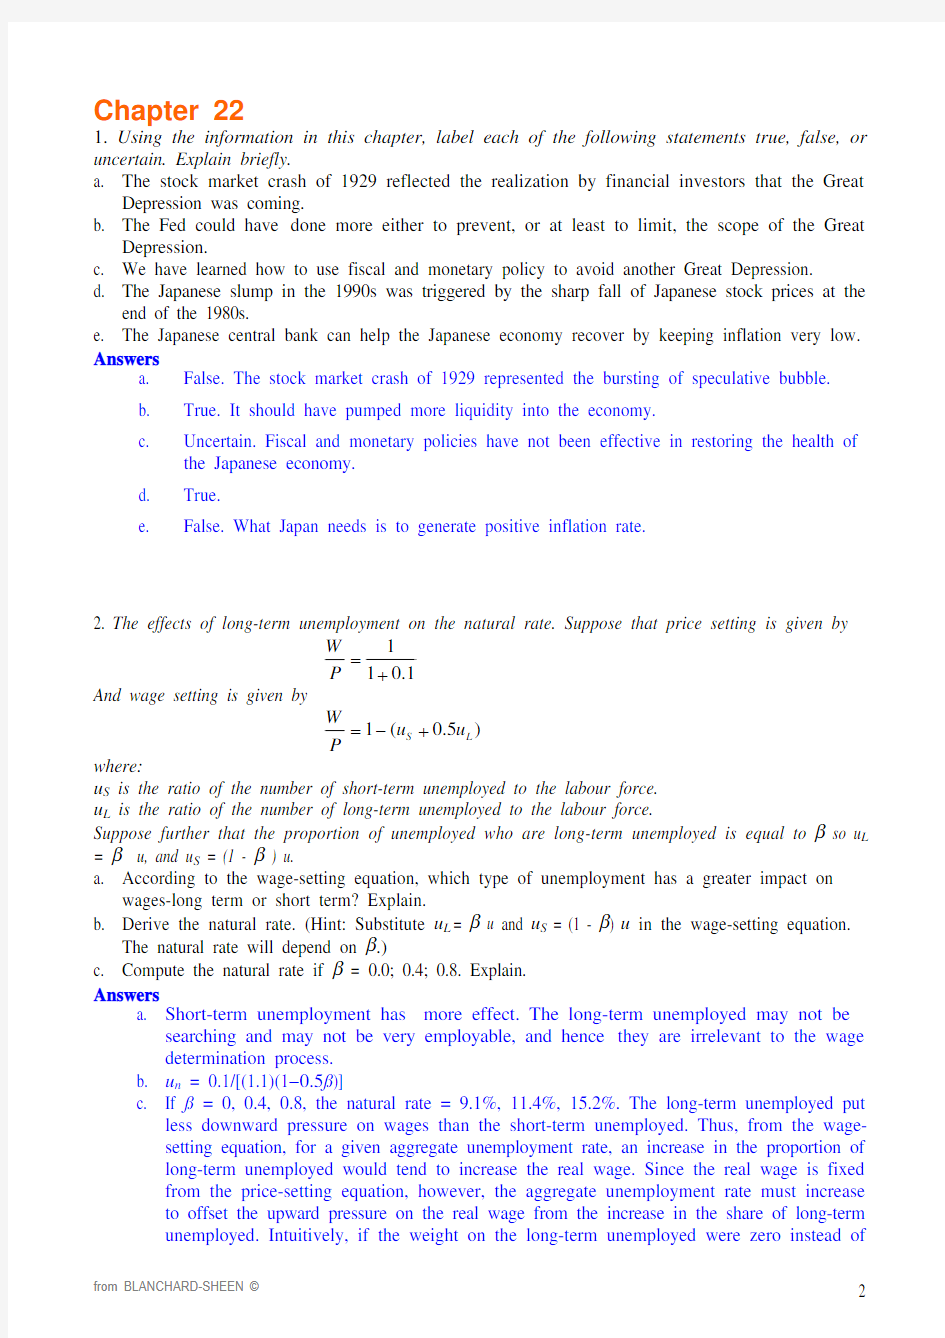 ECON5002_Macroeconomics_2007 Semester 2_Answers_to_Practice_Questions_Ch22_23